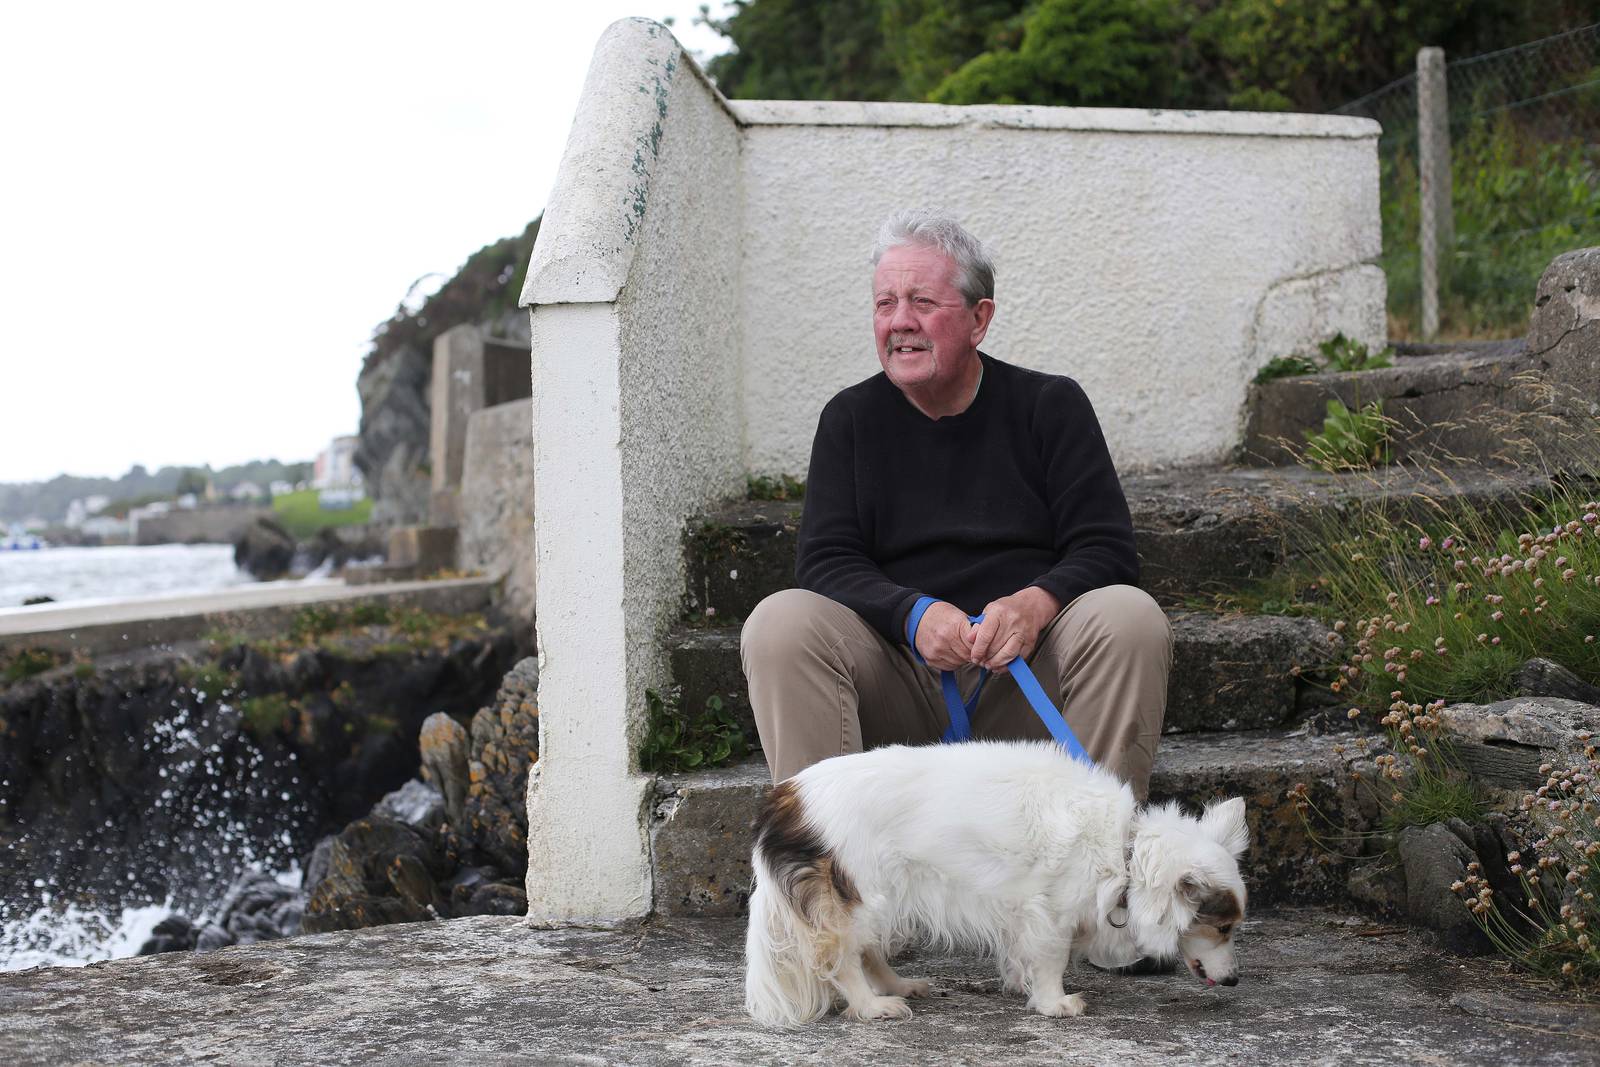 Caption: Gerry McLaughlin, 69, of Moville, Co Donegal, who is meeting with Pope Francis on Monday about being sexually abused at St Peter Claver College in Mirfield, West Yorkshire, a training school for Catholic priests, during the 1960s.